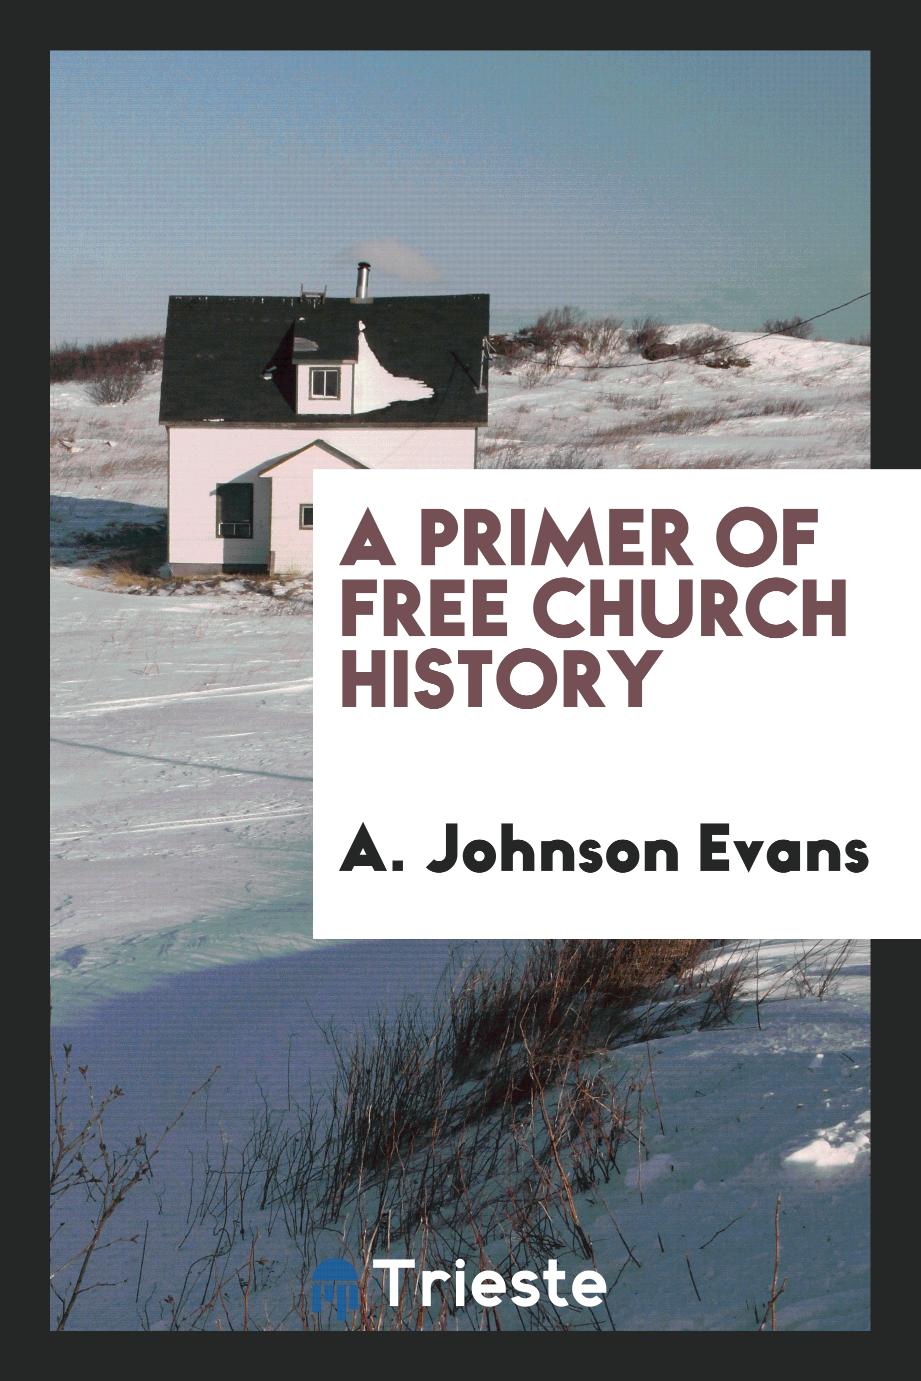 A primer of Free Church history